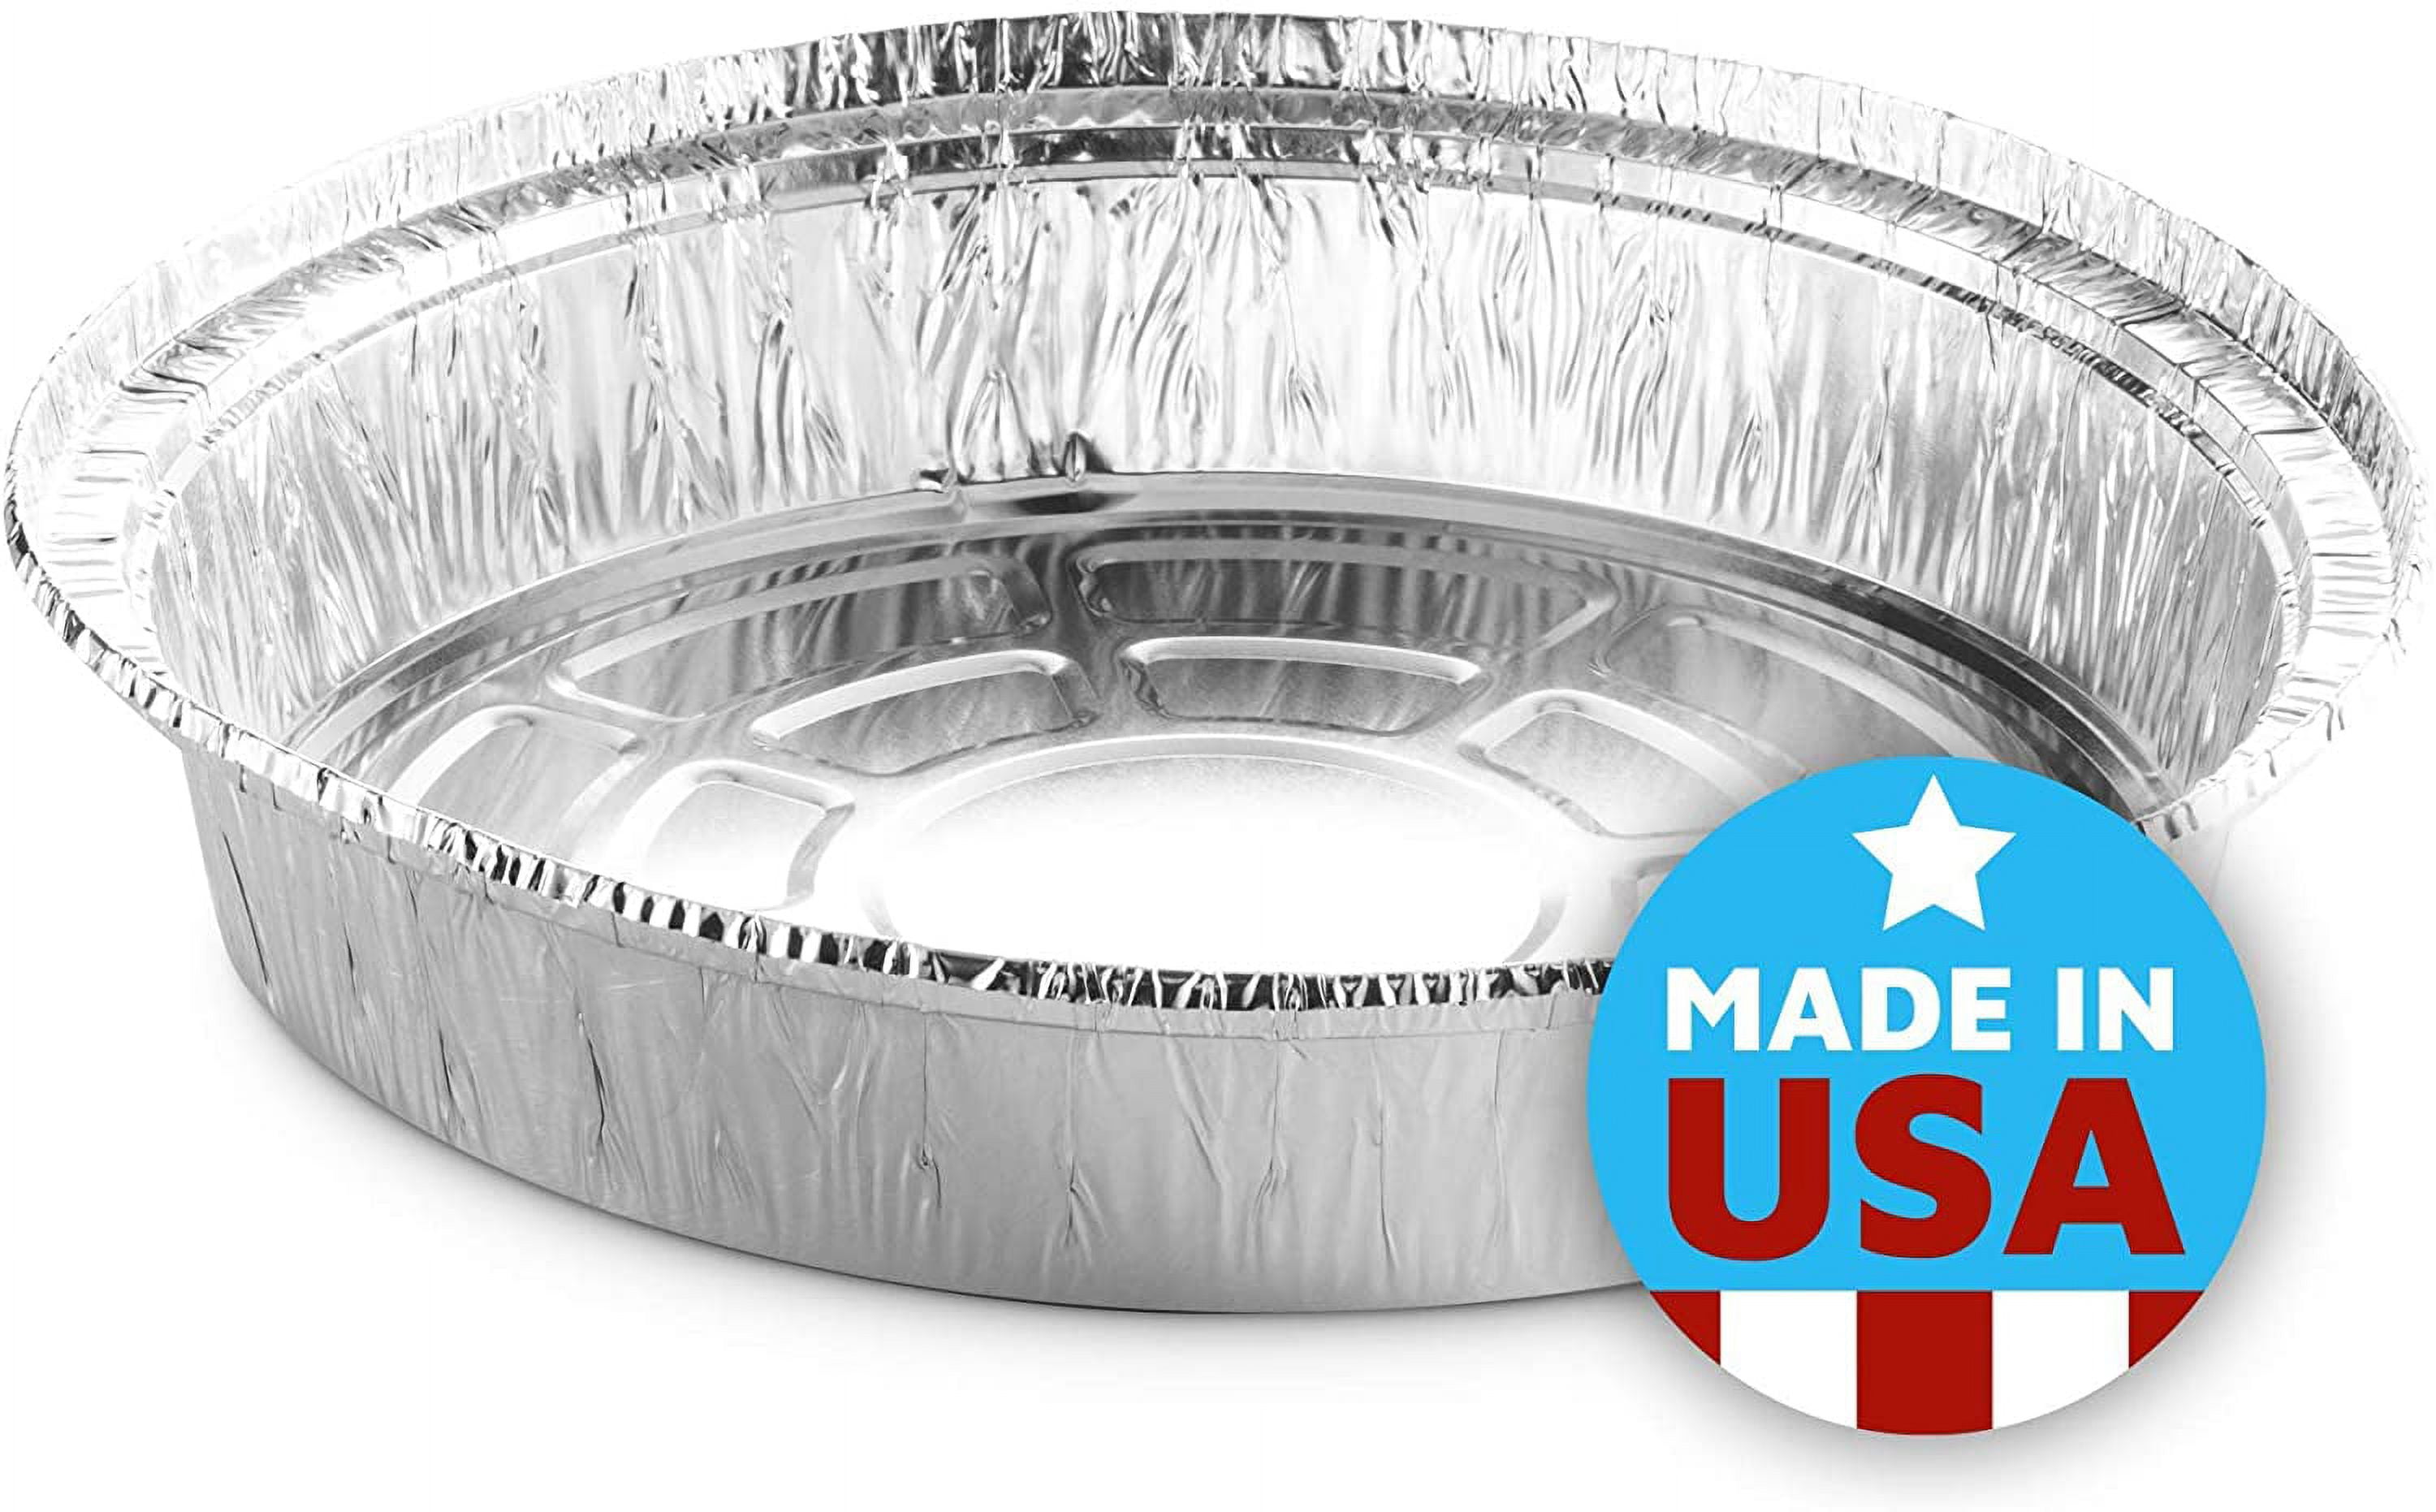 MontoPack 9” Aluminum Foil Pie Pans | Round Disposable Containers with  Angled Walls for Tart Baking, Storing, Serving & Reheating | Freezer and  Oven